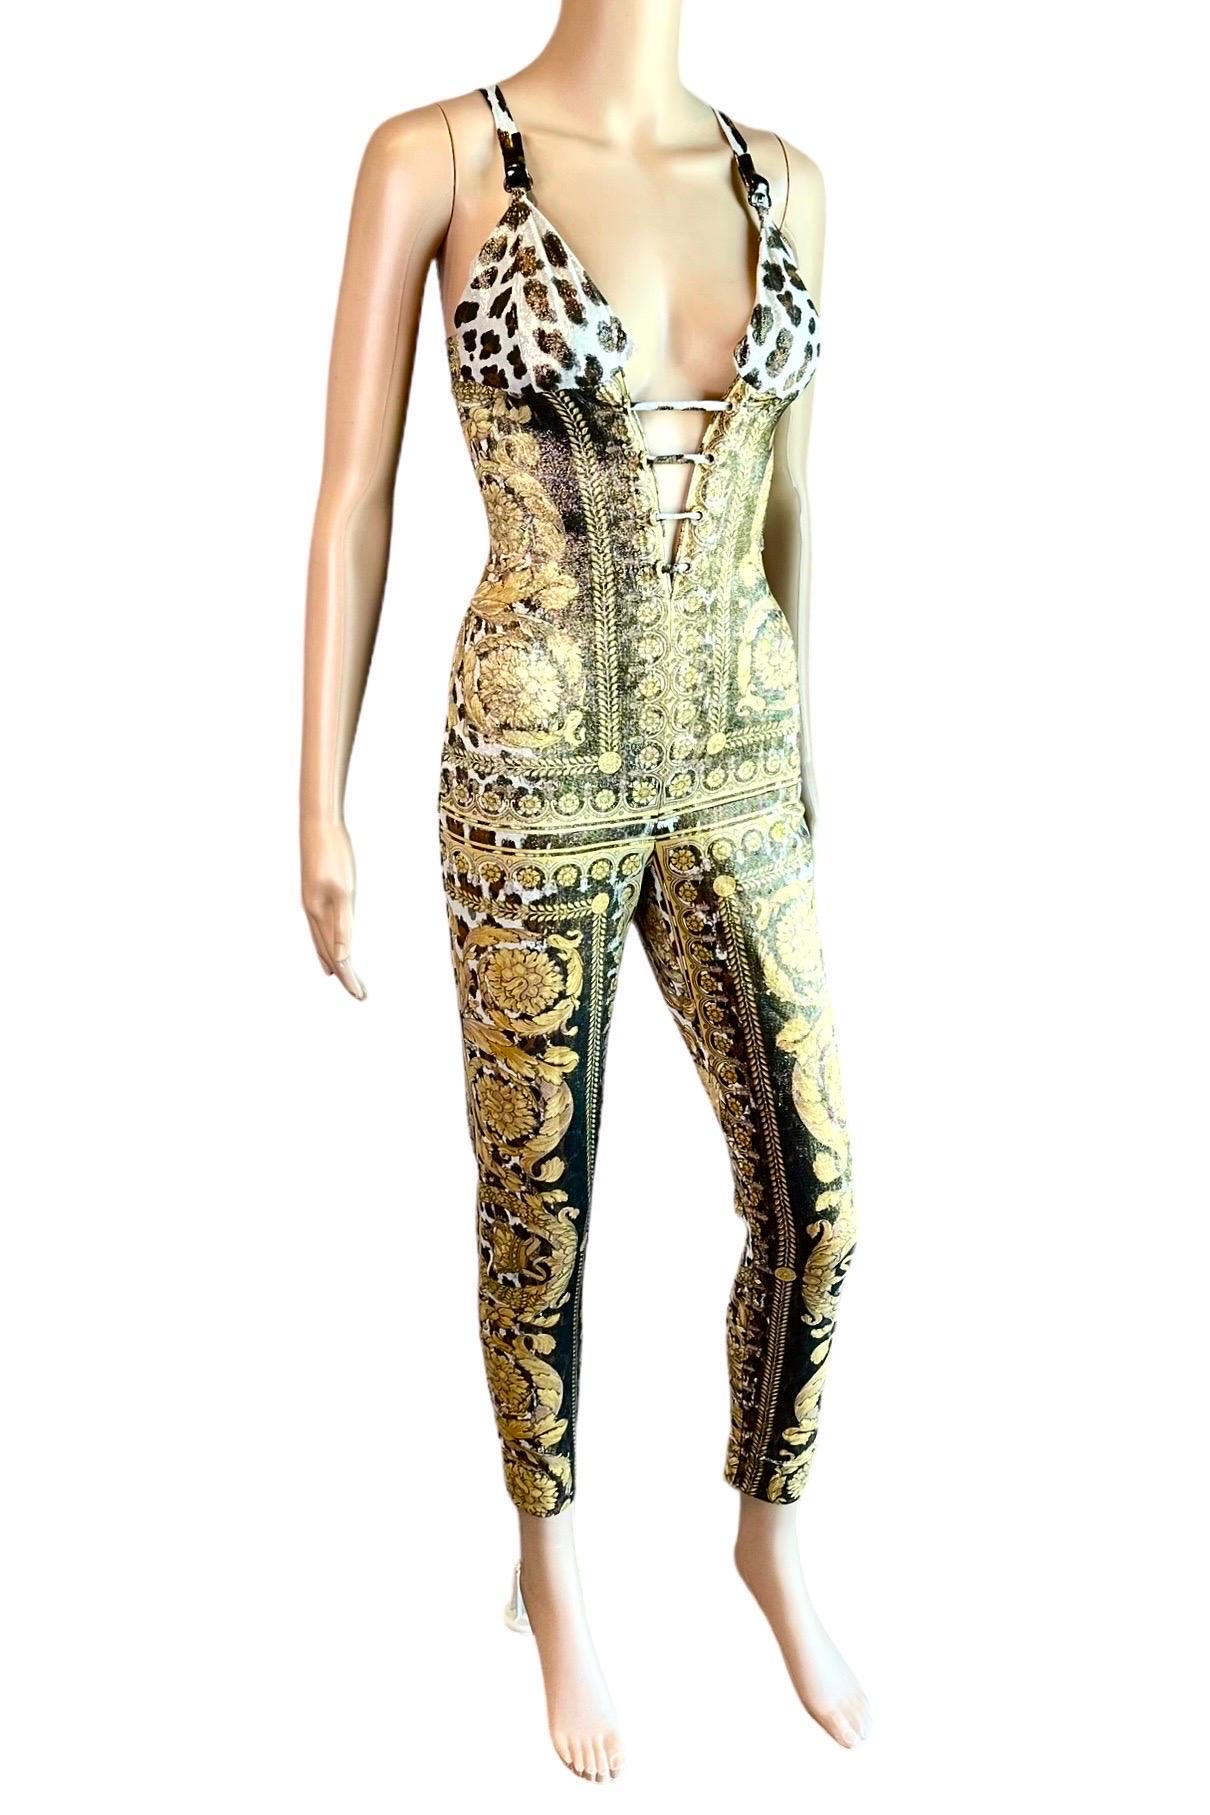 Gianni Versace S/S 1992 Runway Bustier Embellished Baroque Catsuit Jumpsuit For Sale 2